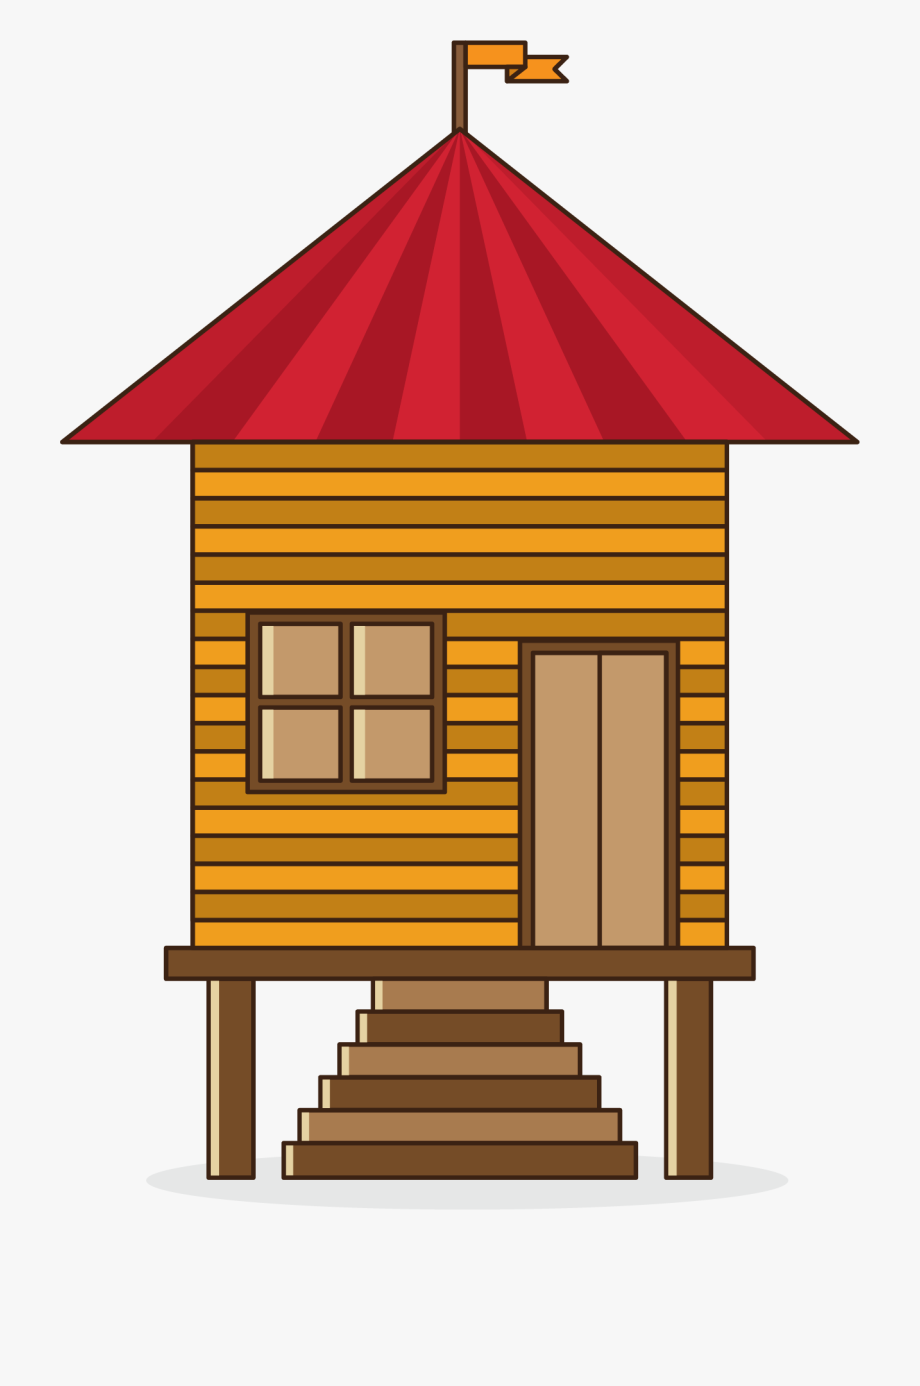 Hut clipart roof, Hut roof Transparent FREE for download on ...